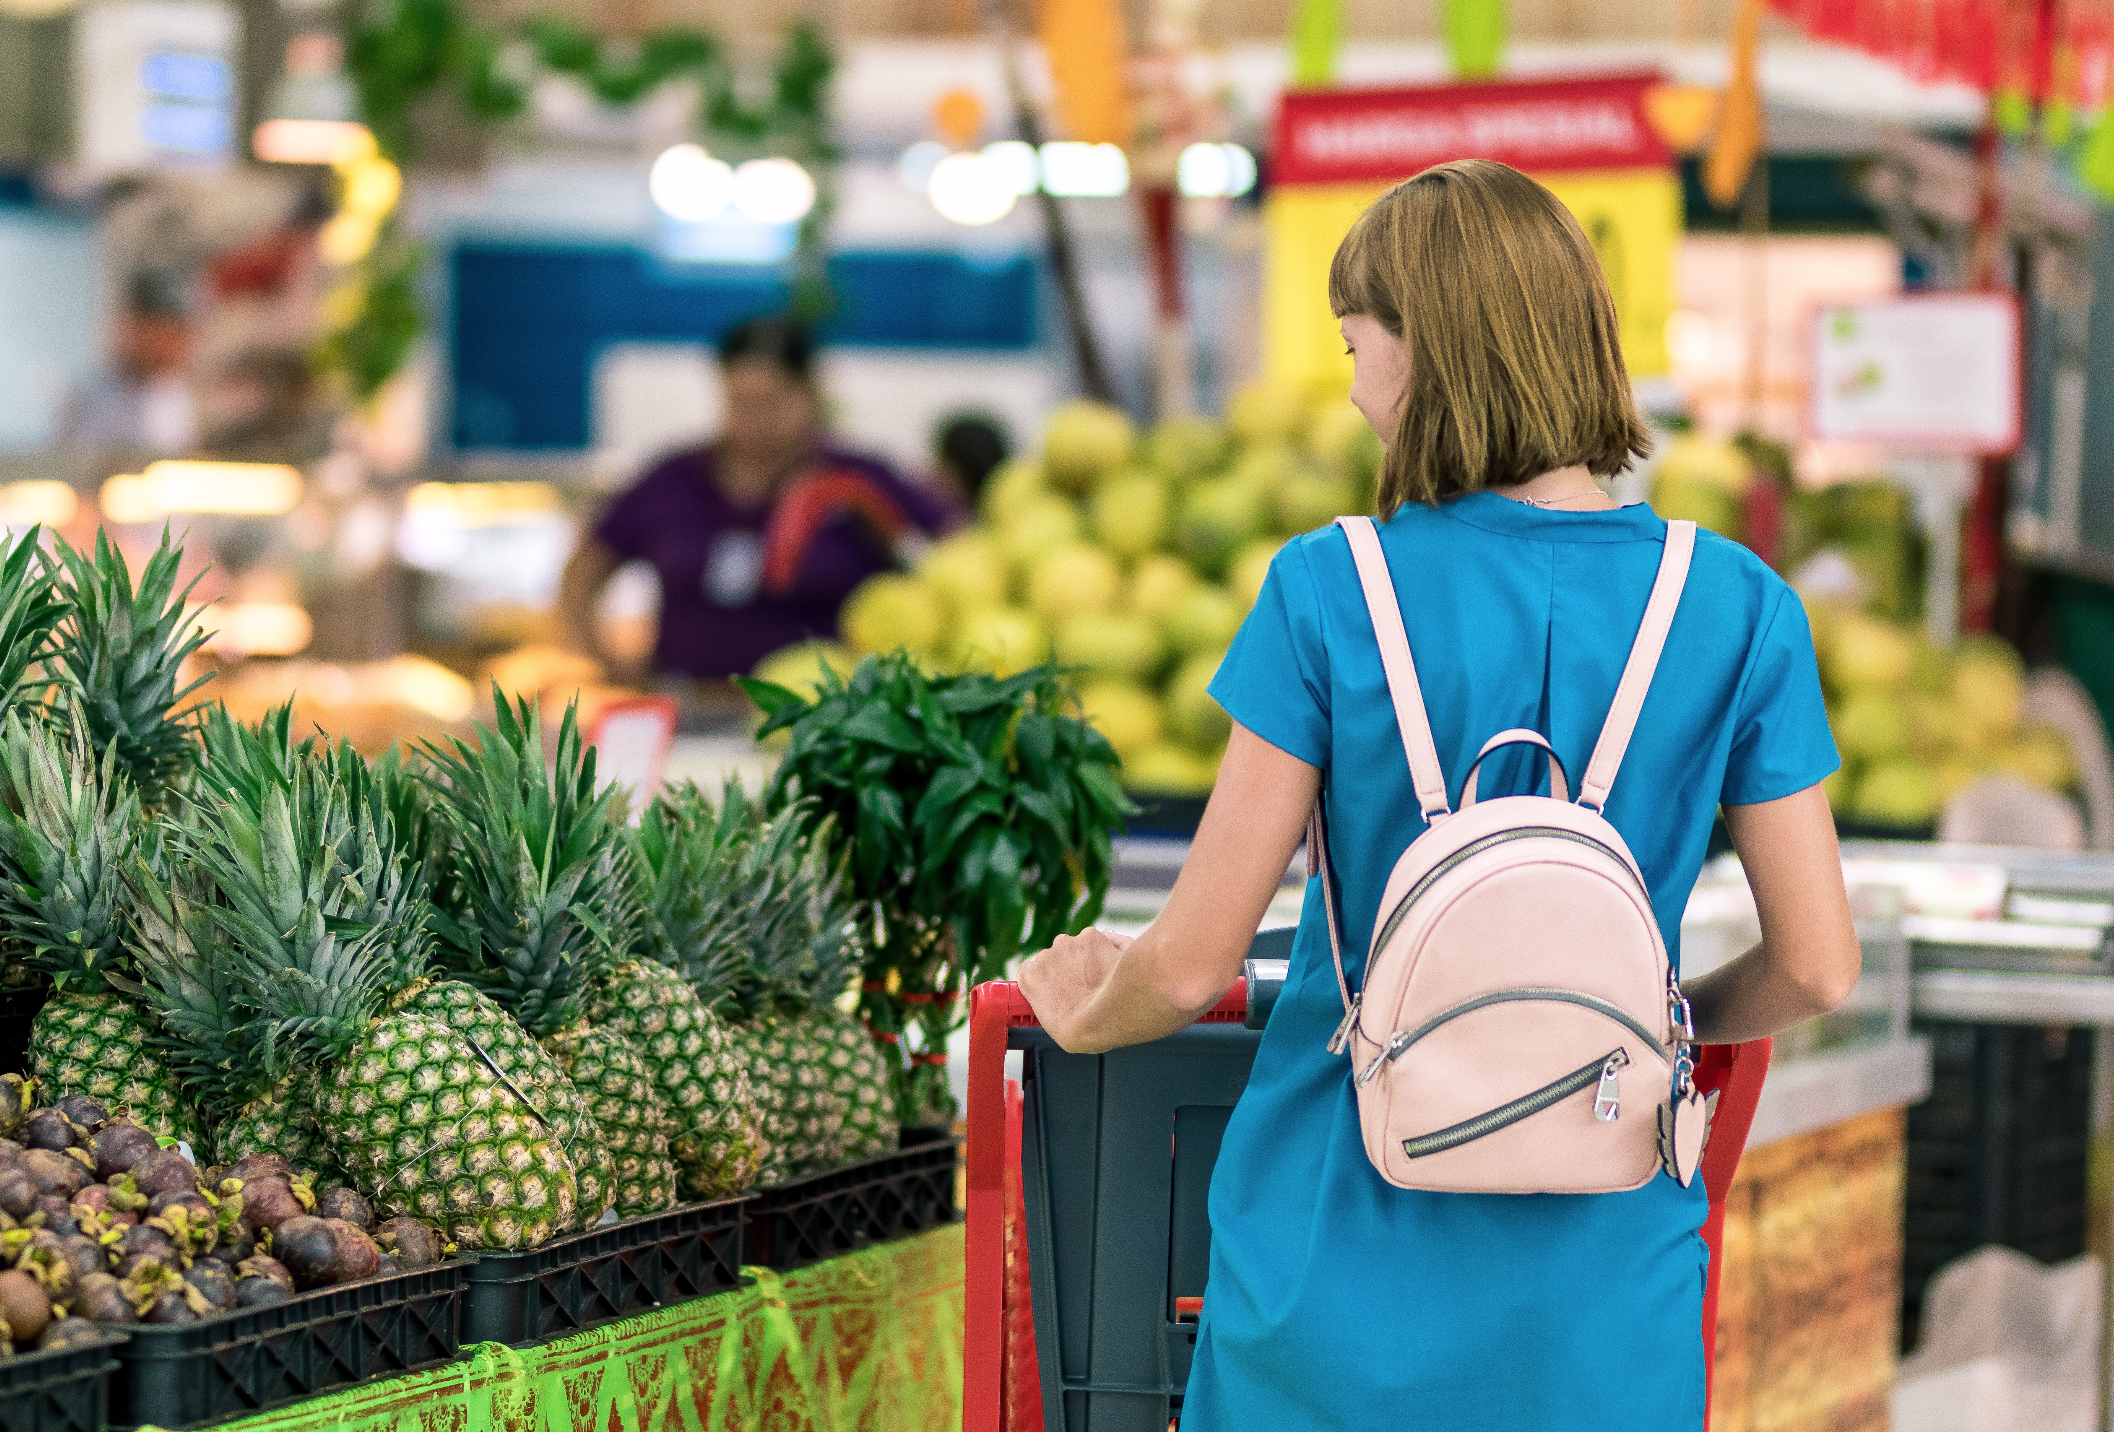 A woman at a grocery store. | Source: Pexels